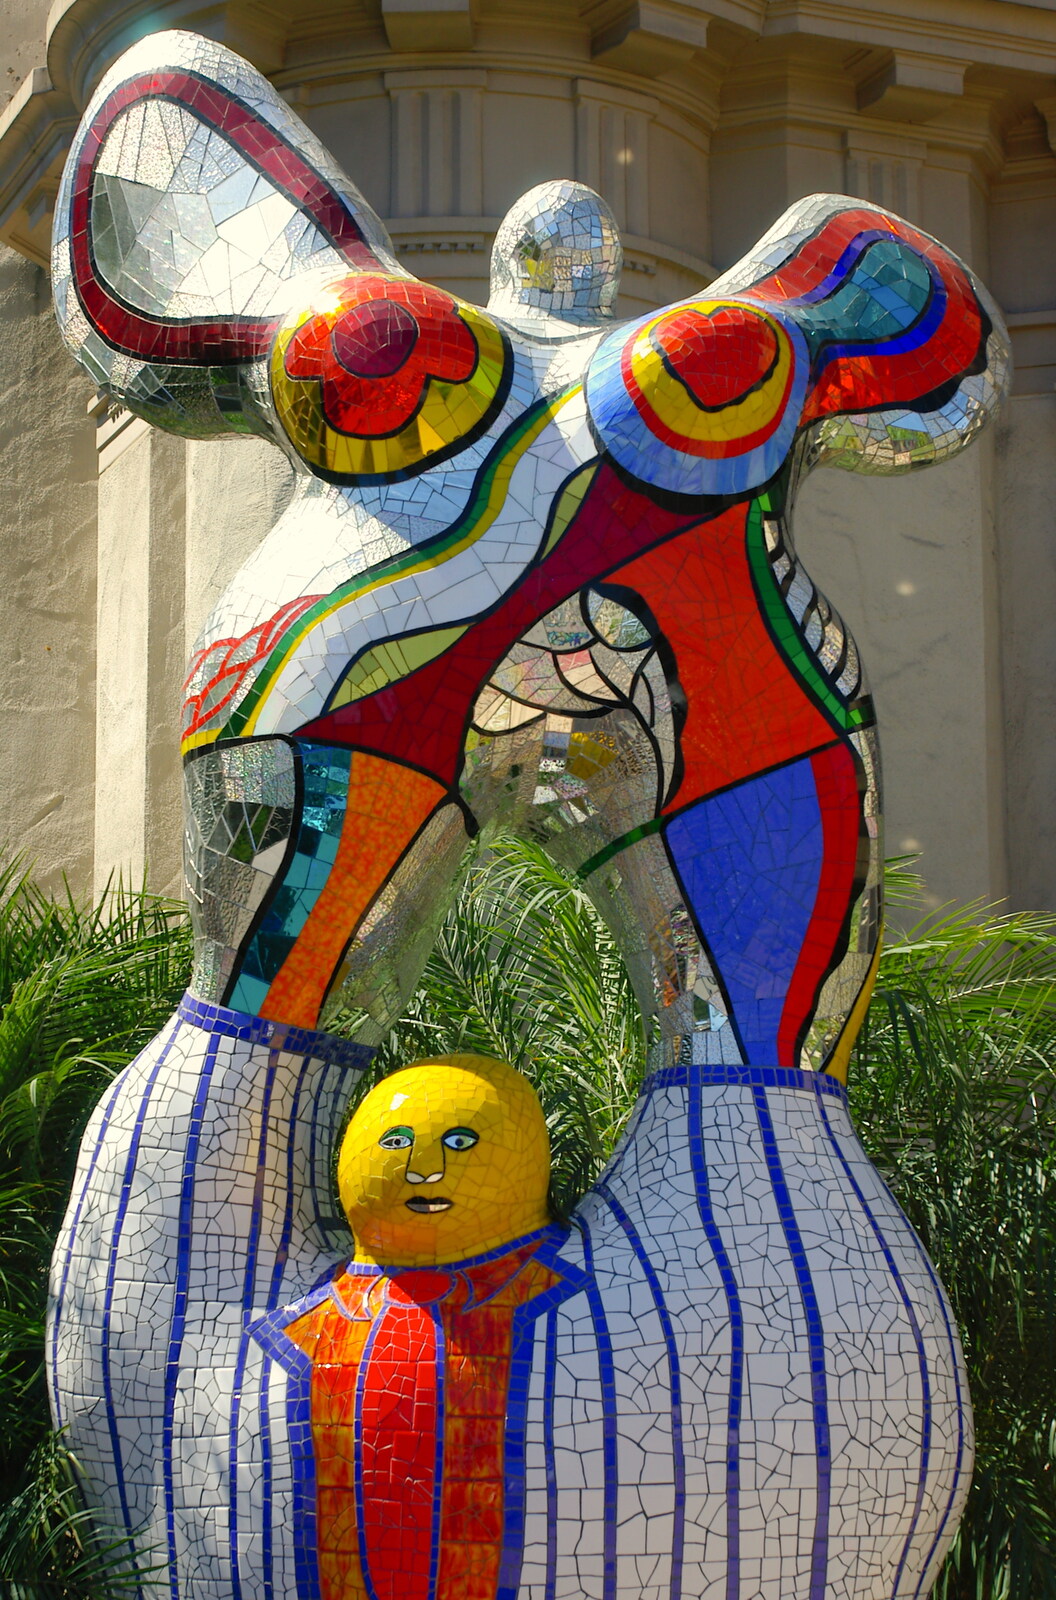 Scenes and People of Balboa Park, San Diego, California - 25th September 2005: A Picasso-ey Mirror-mosaic statue